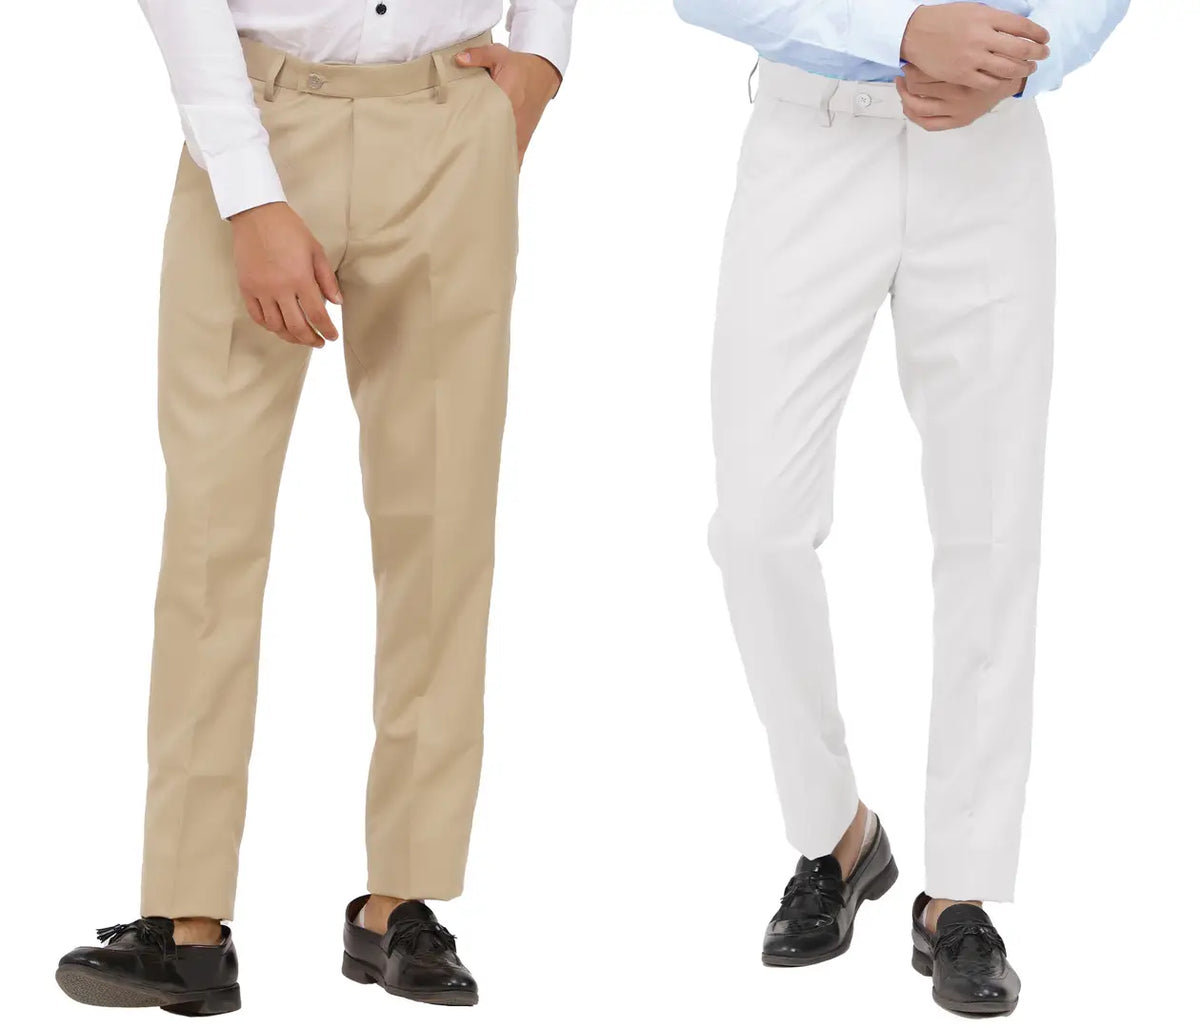 Kundan Men Poly-Viscose Blended Beige and White Formal Trousers ( Pack of 2 Trousers )